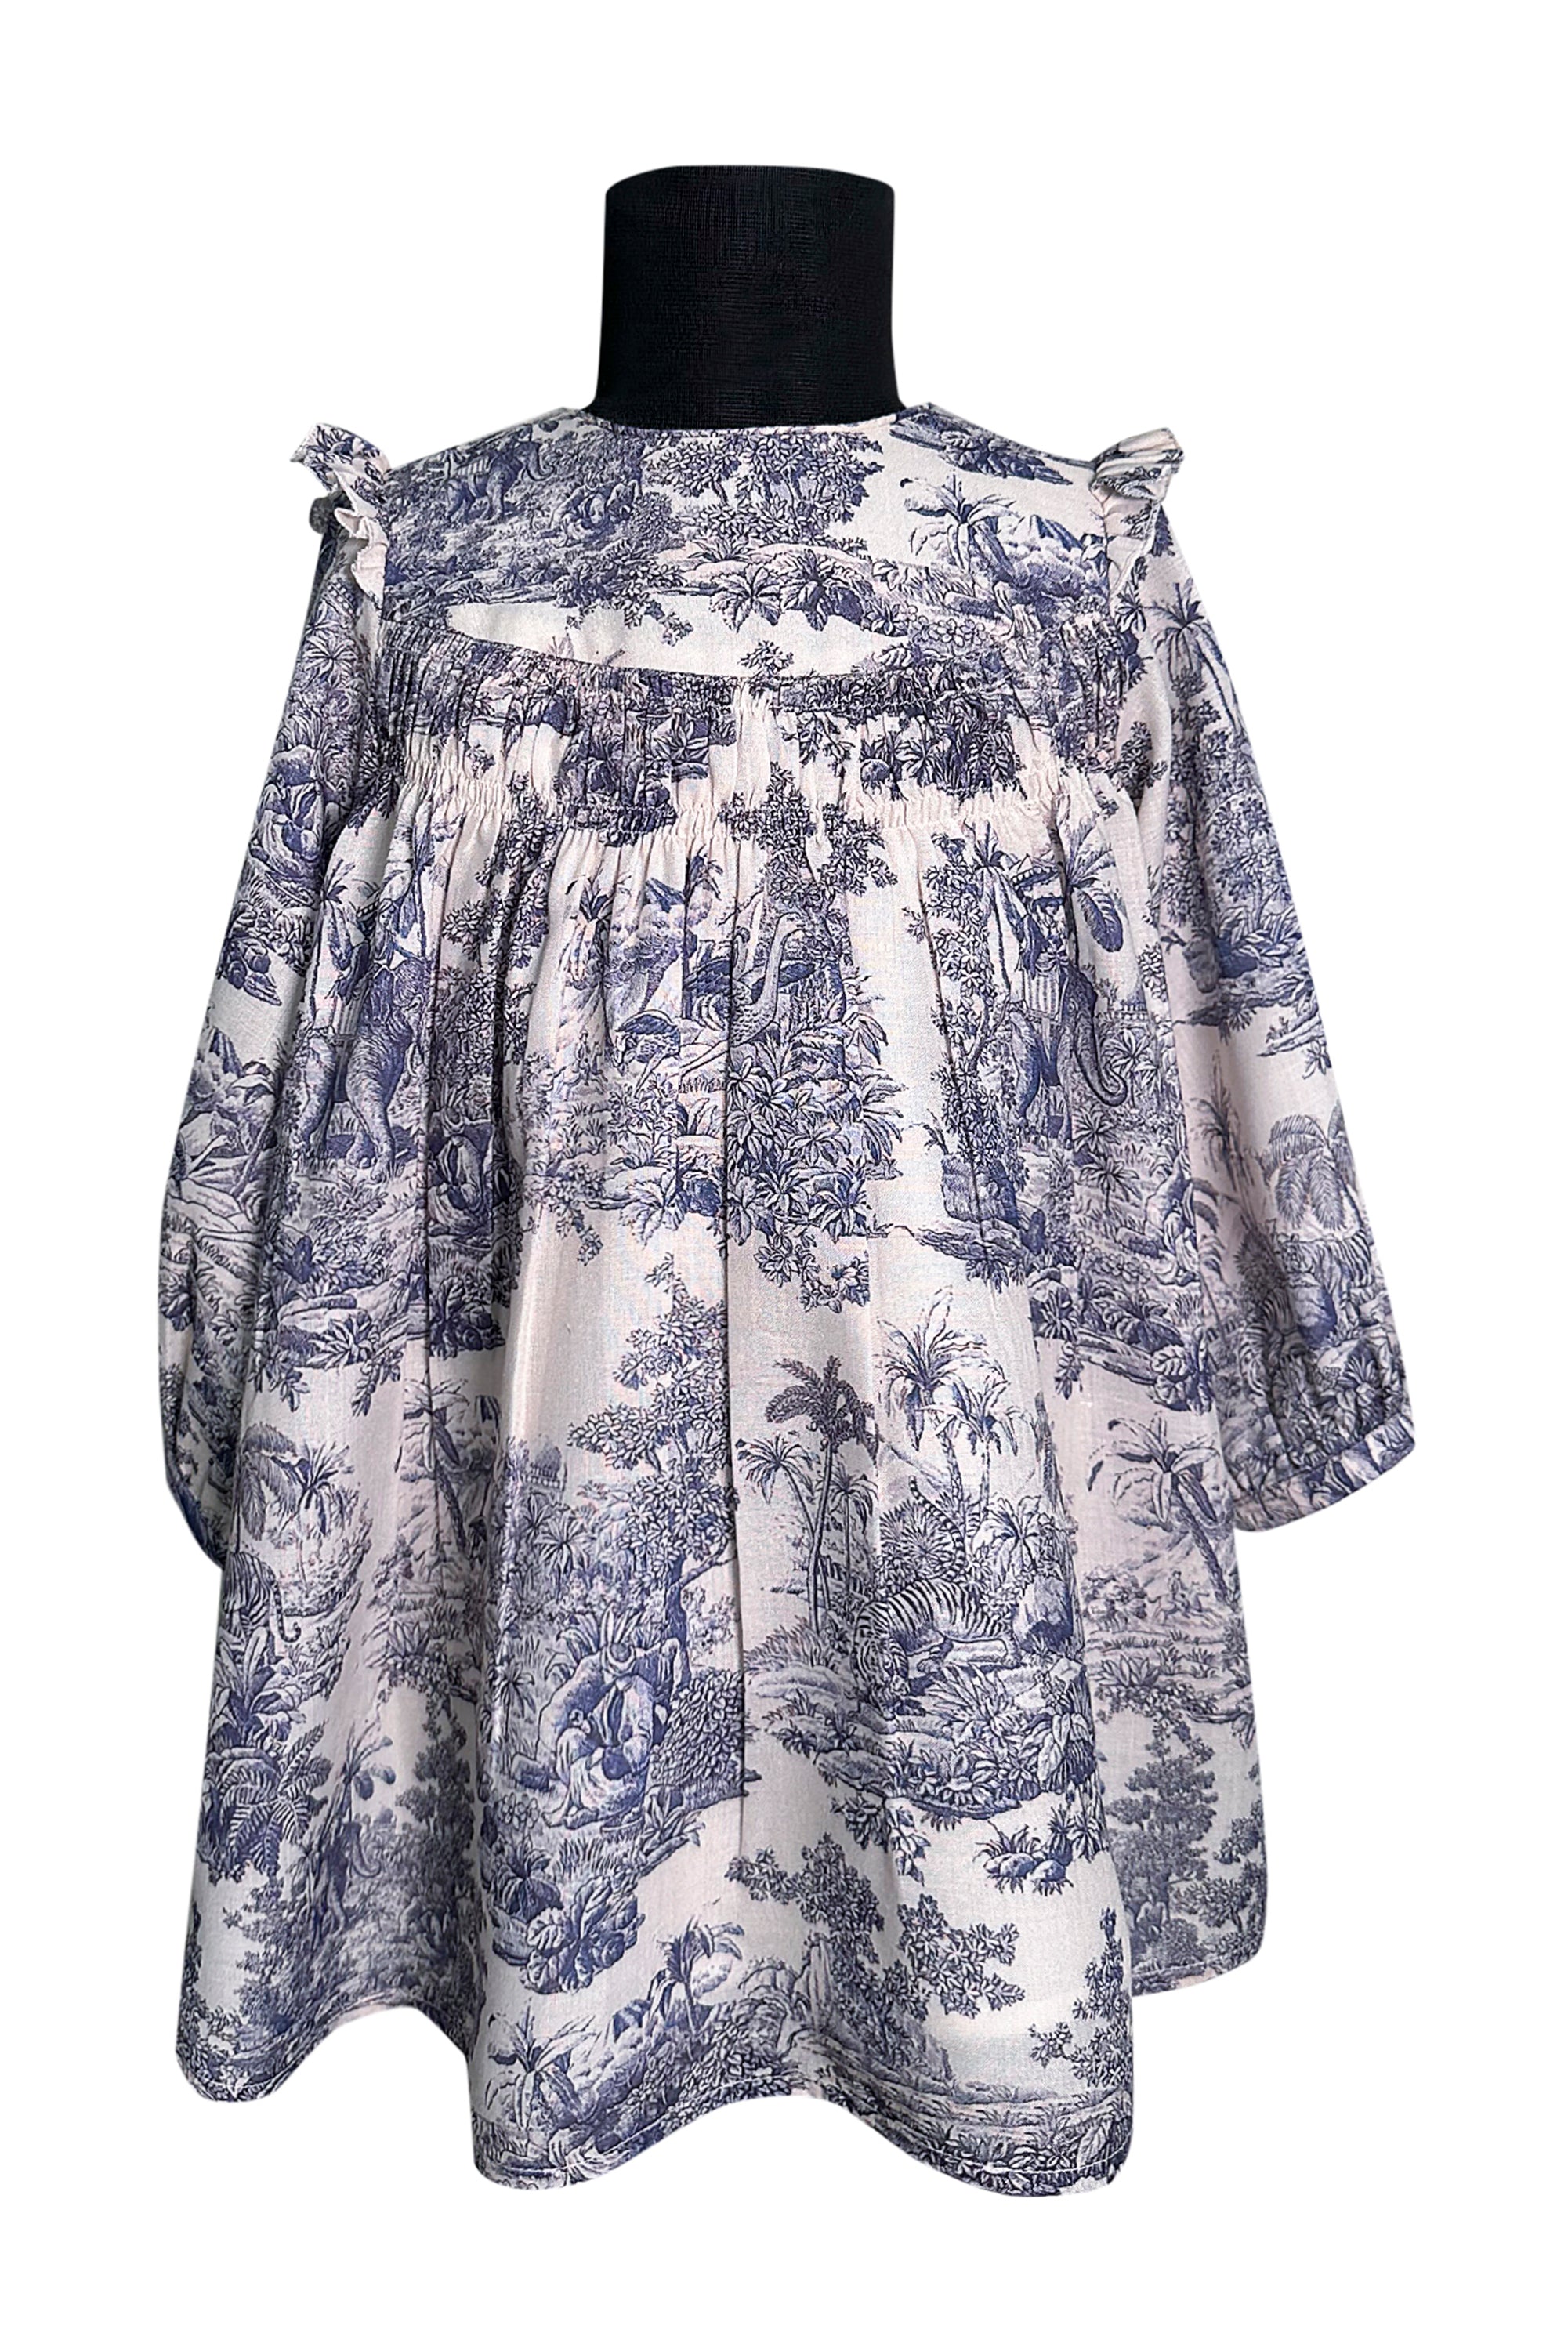 Blue and White Printed Full Sleeves Dress